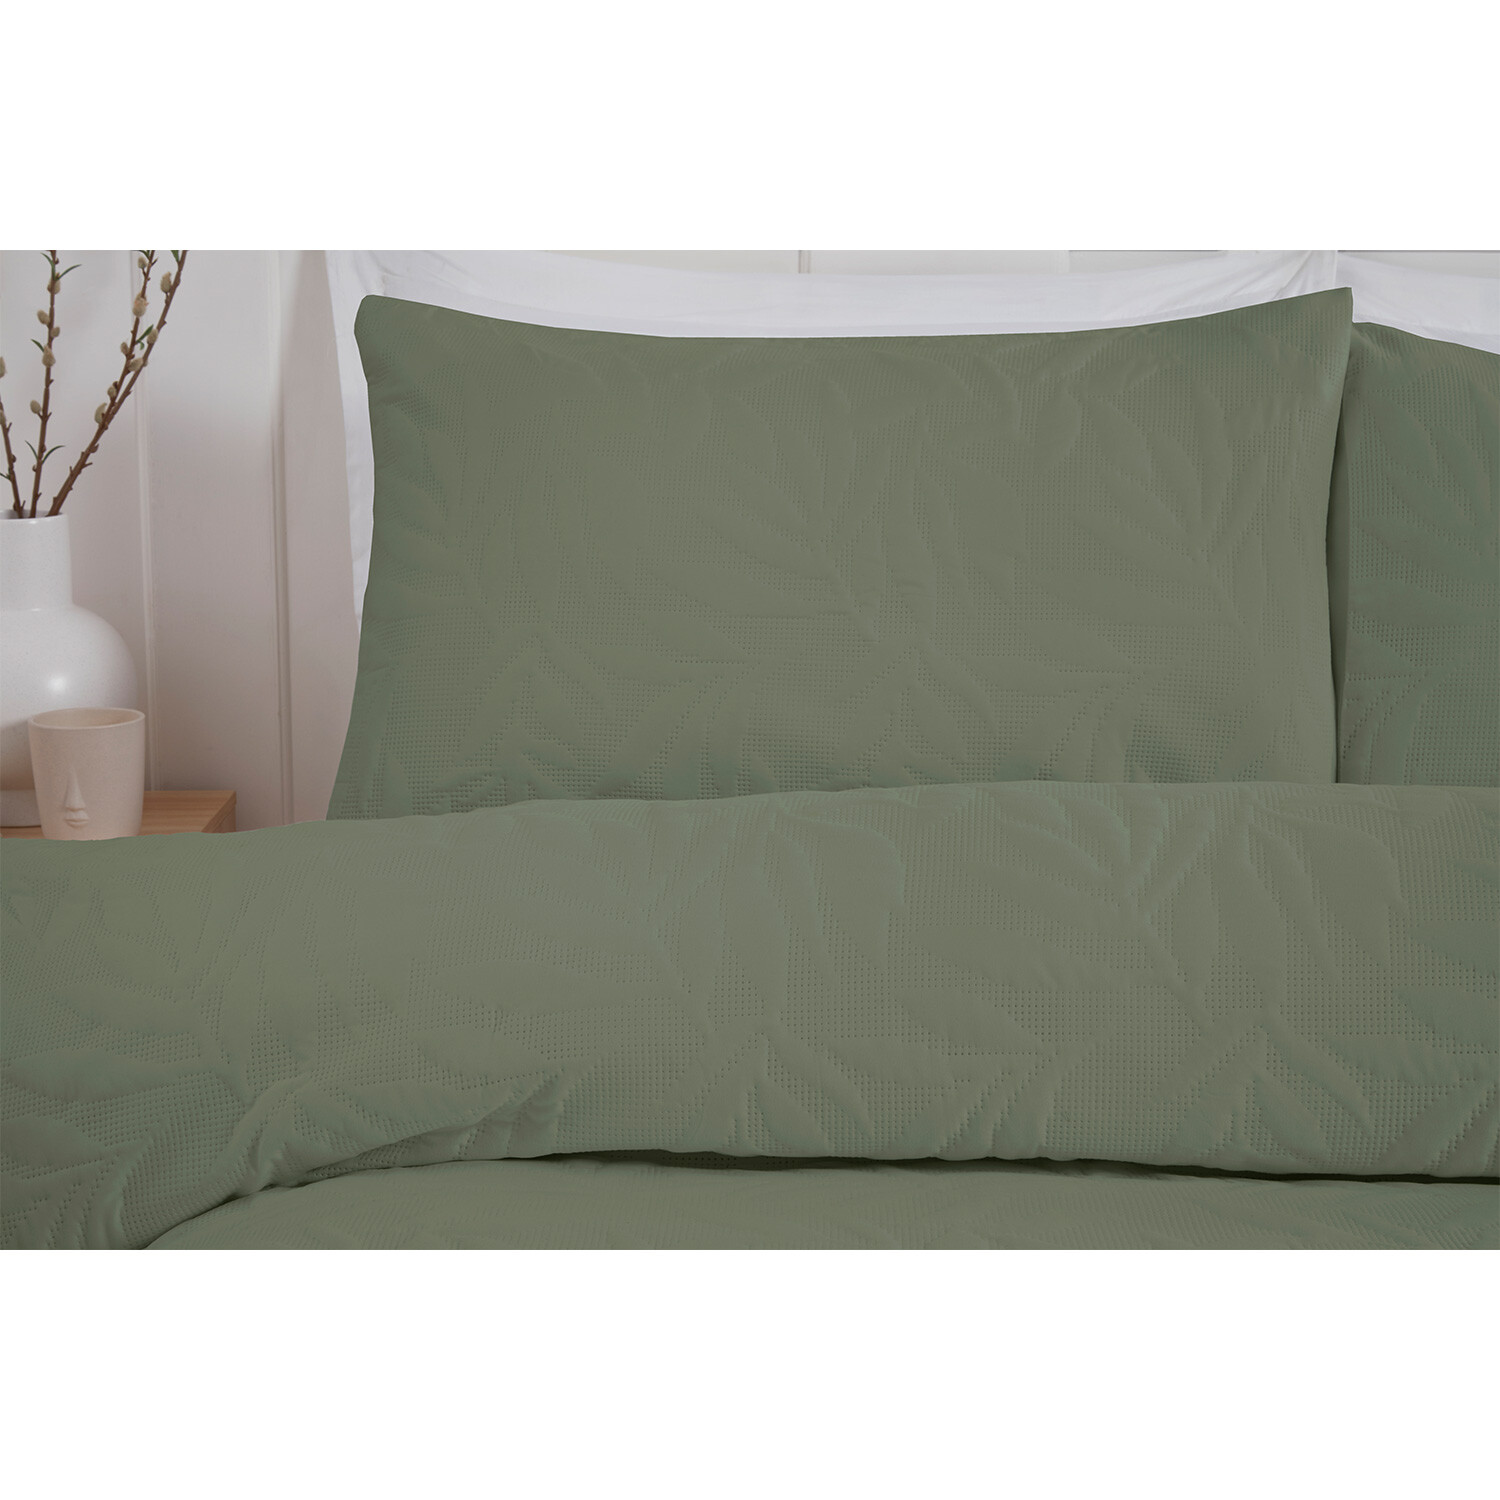 Avery Leaf Duvet Cover and Pillowcase Set - Olive Green / King Image 2